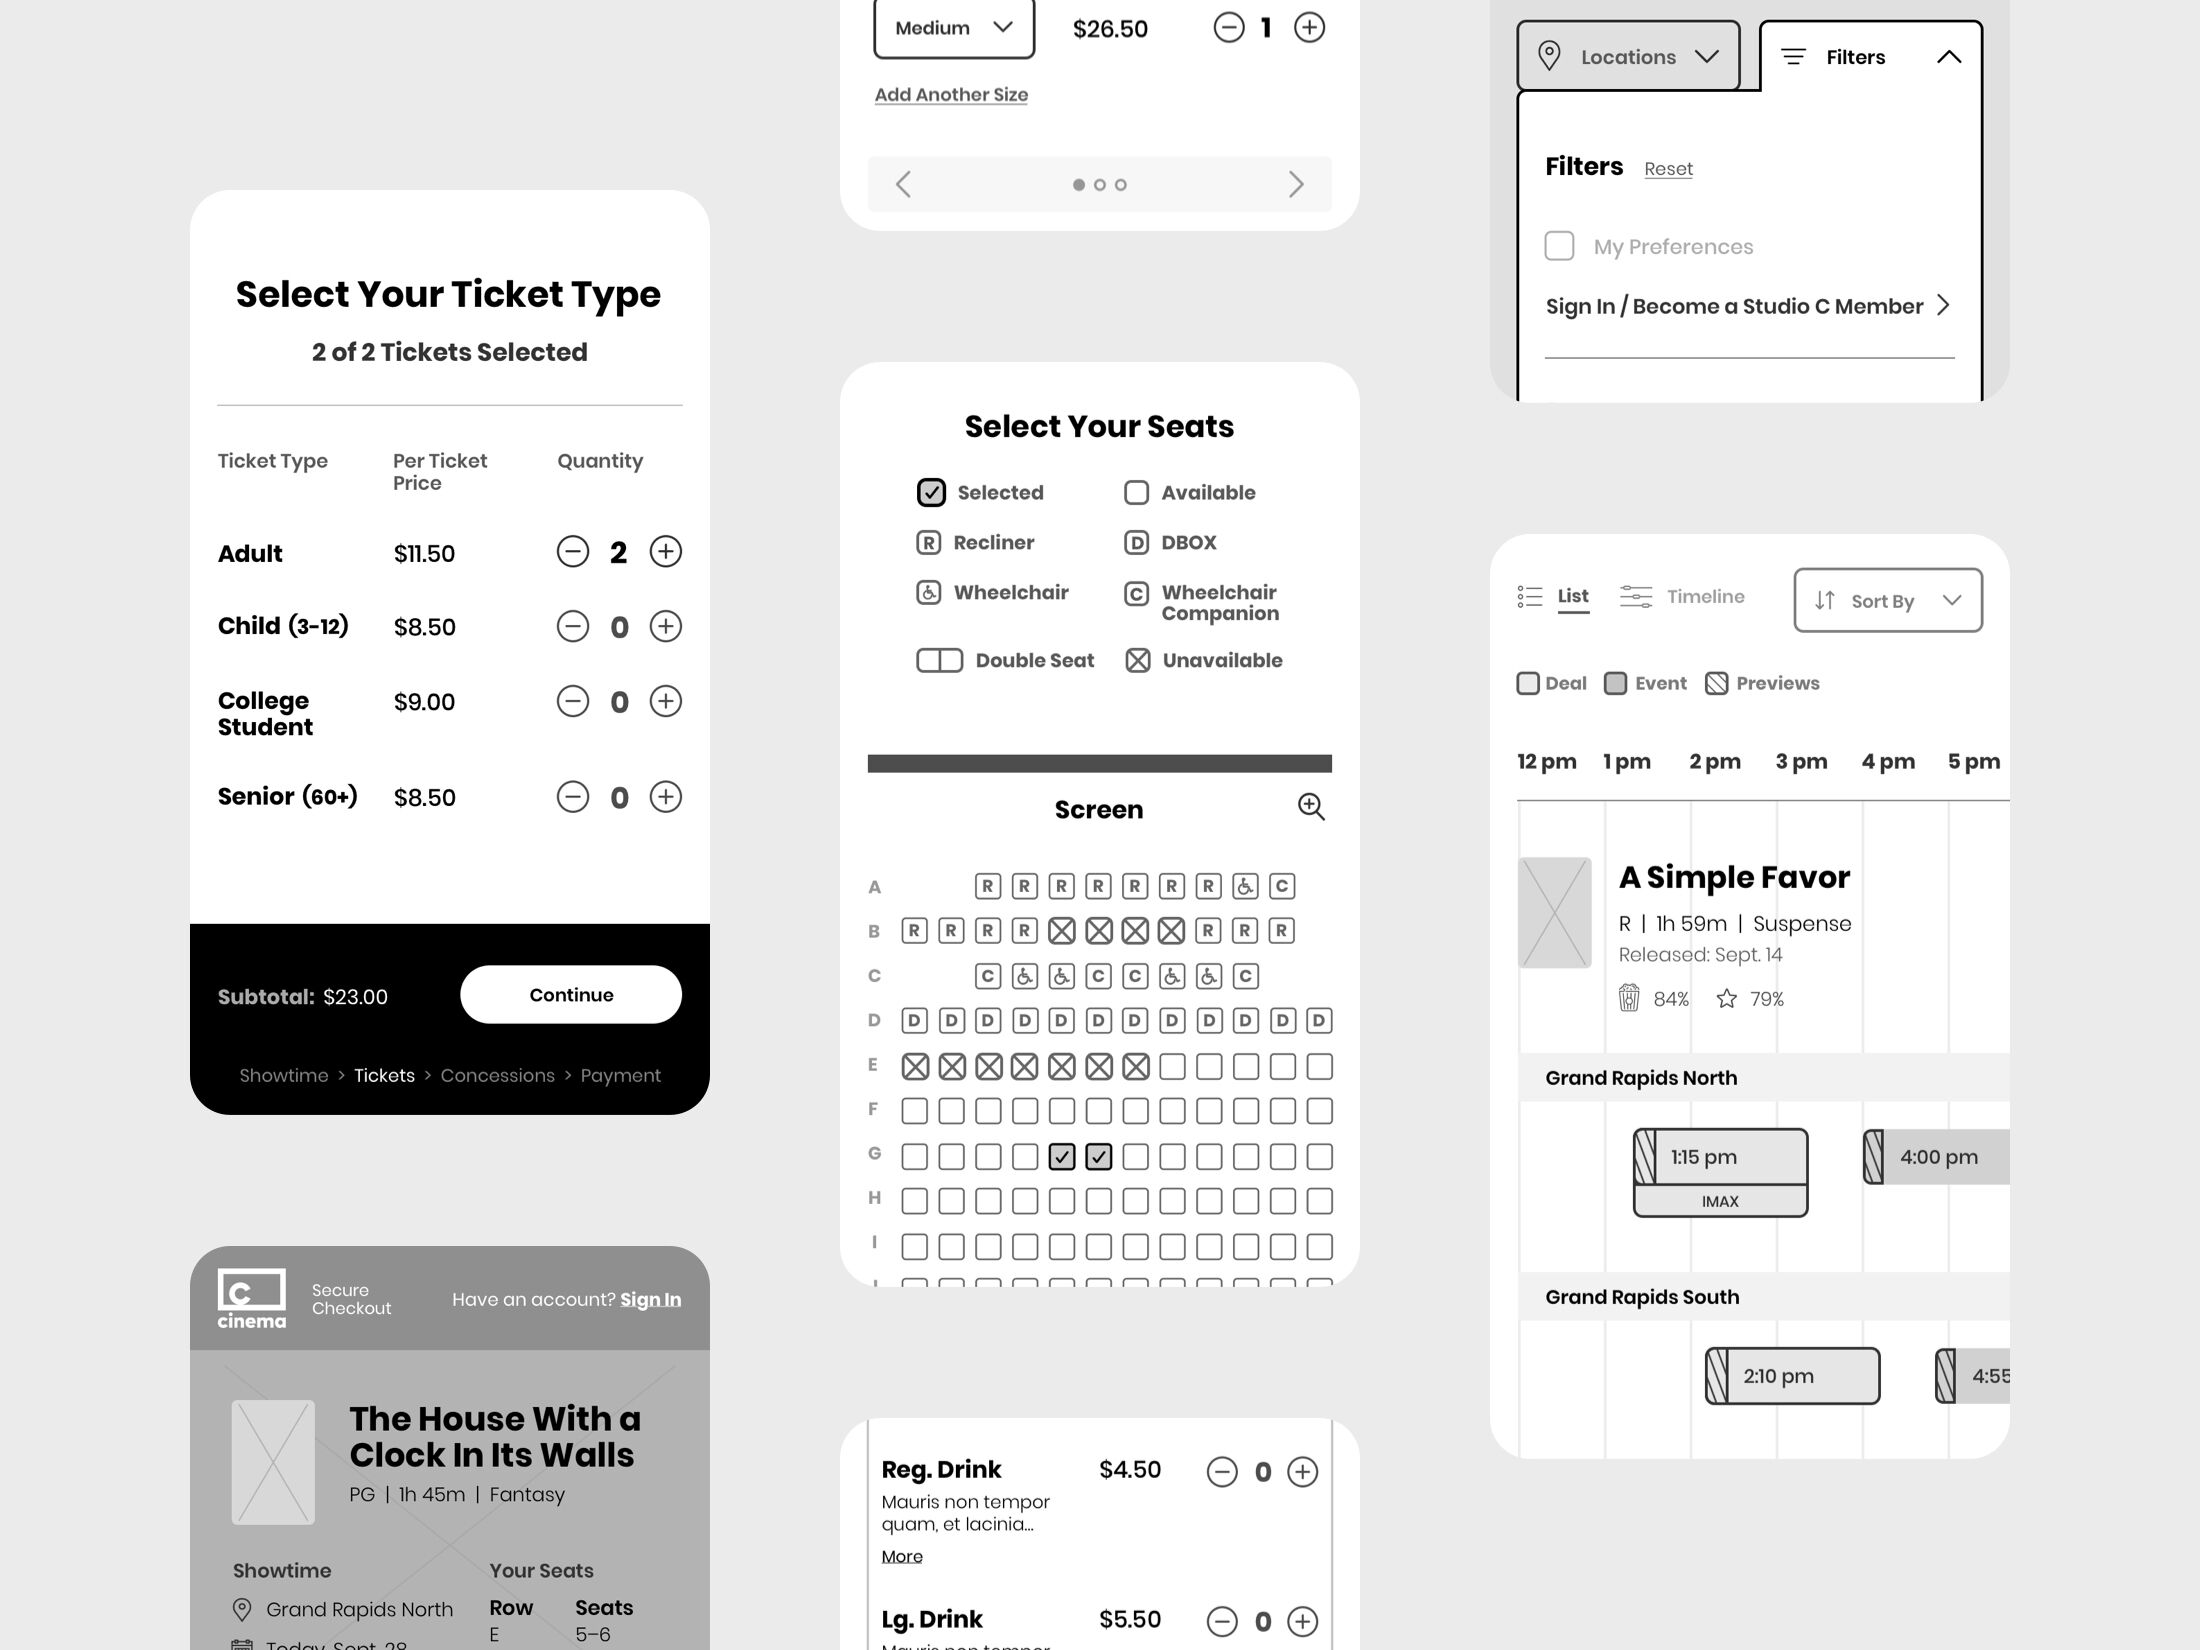 Wireframe prototype produced for user testing